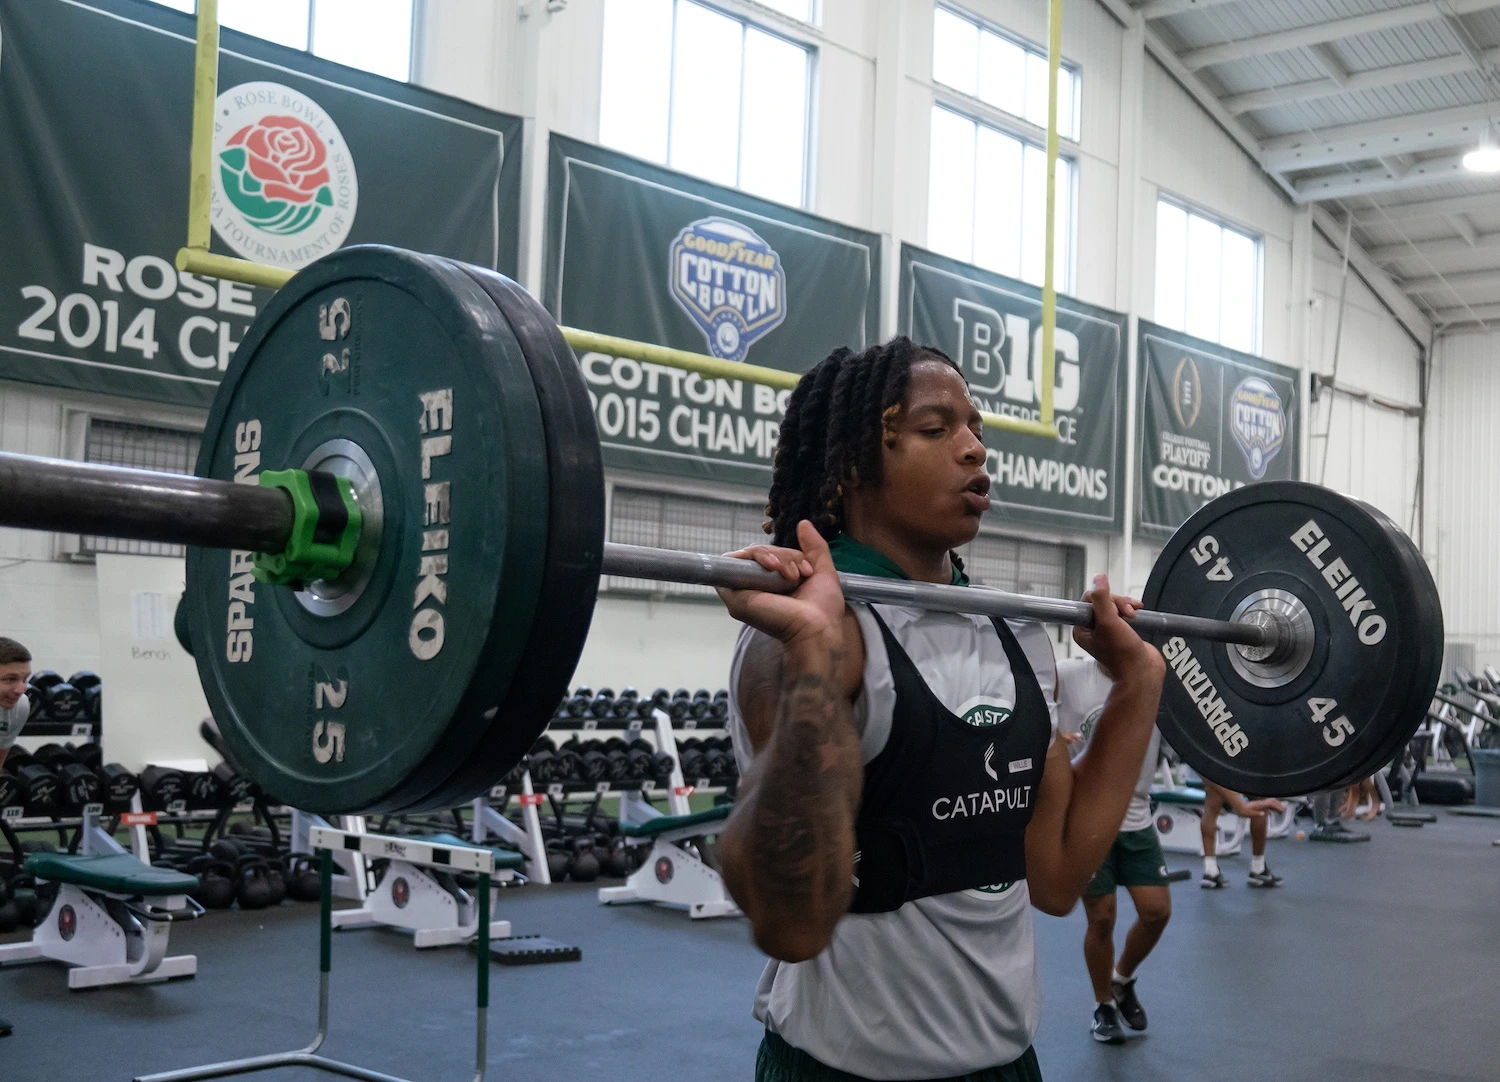 MSU football player Ade Willie lifts weights while training in the catapult tracking device